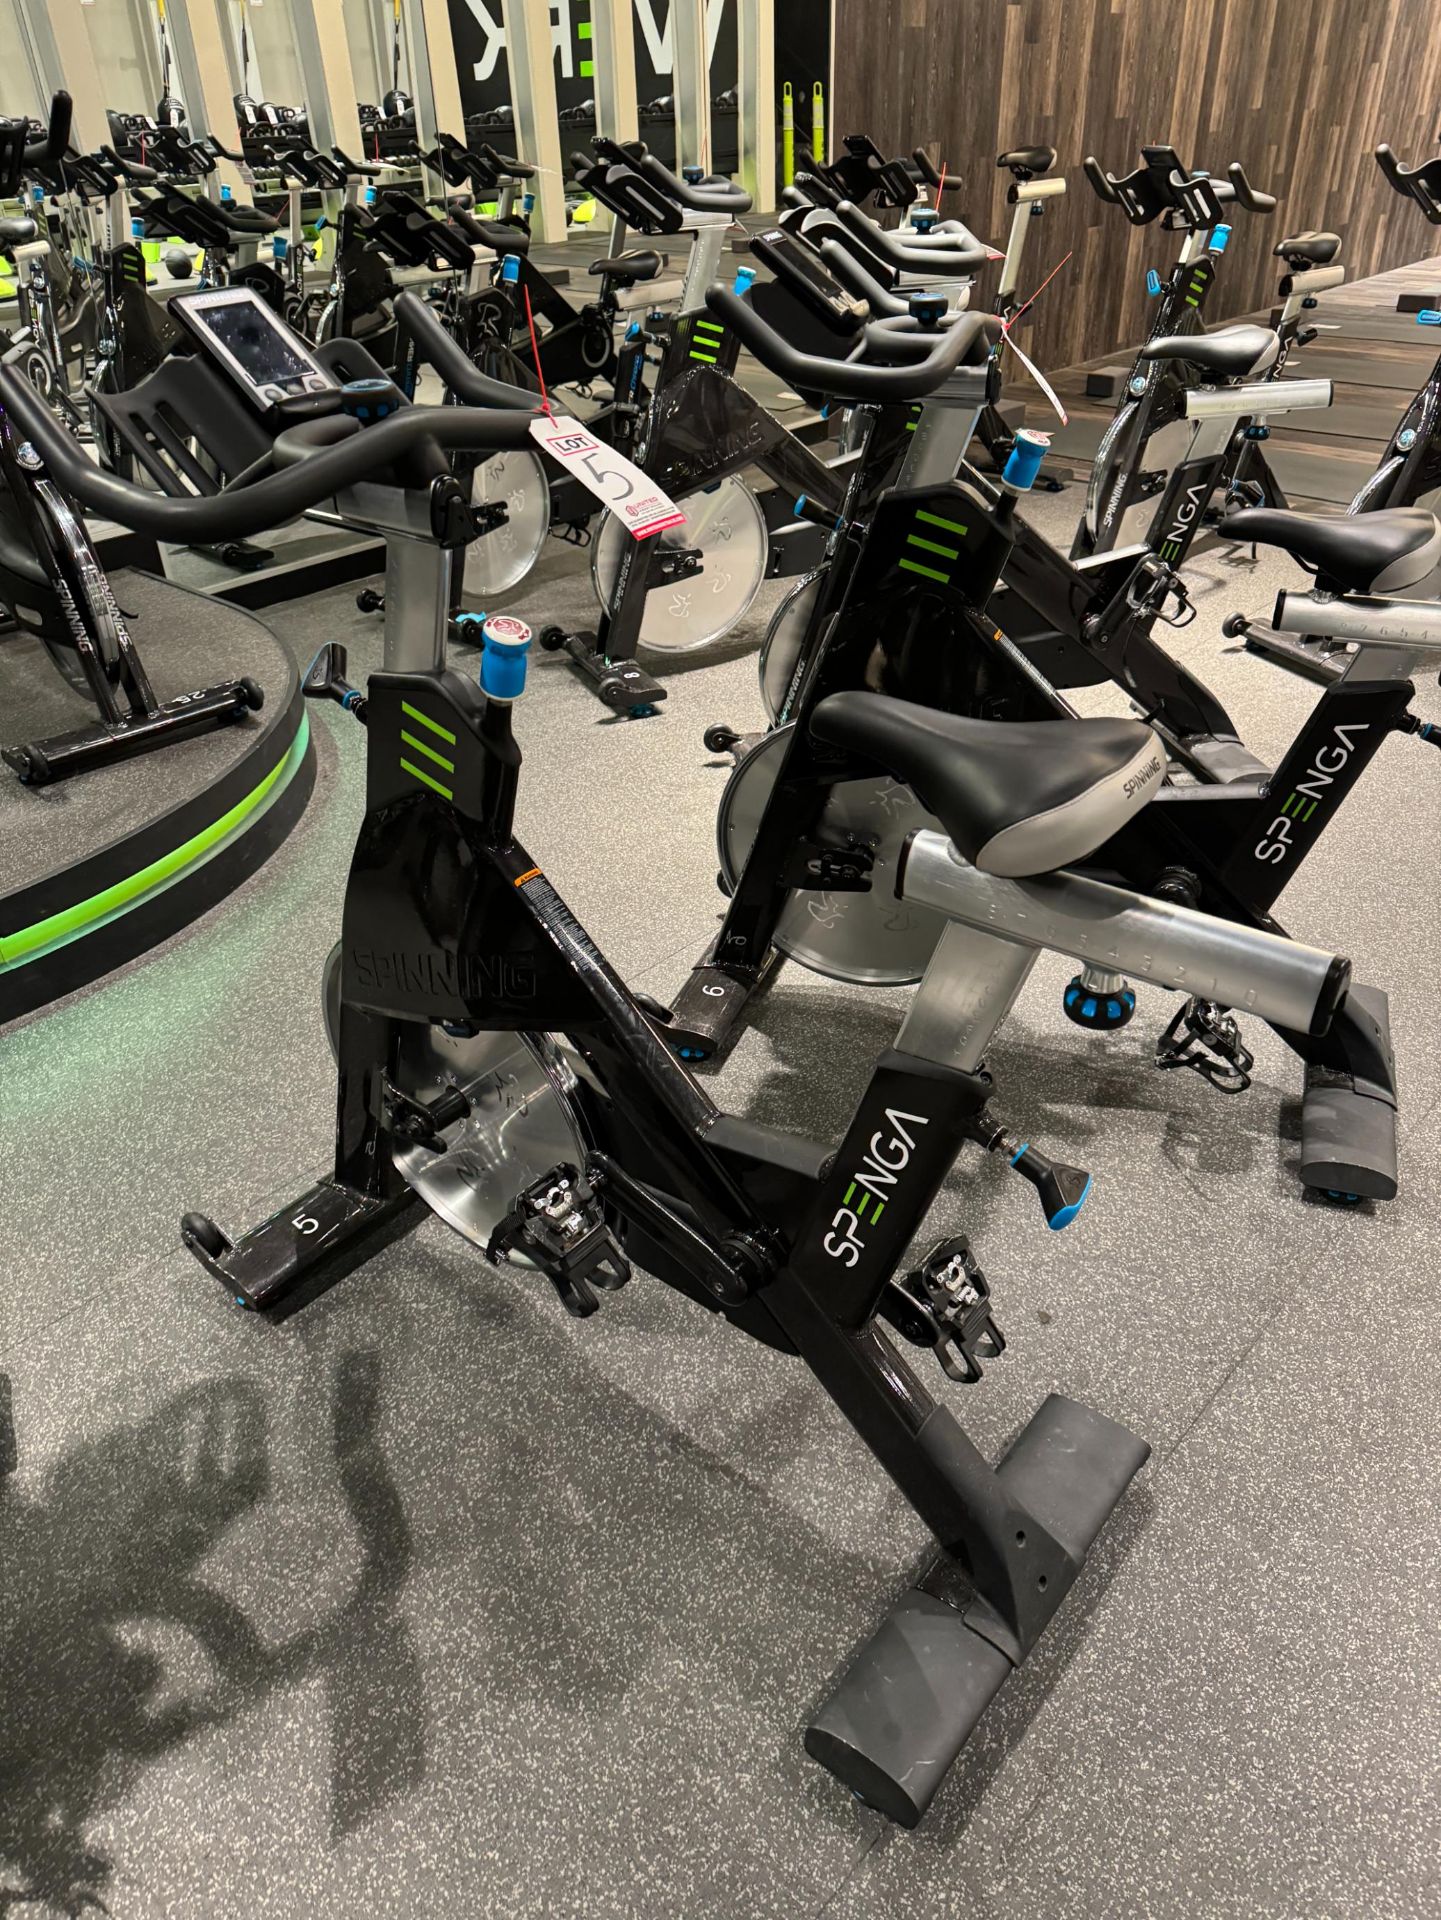 PRECOR SBK 869 SPINNER CHRONO POWER BIKE, W/ CONSOLE, S/N AC97I20190255, (NOTE: SOLD SUBJECT TO BULK